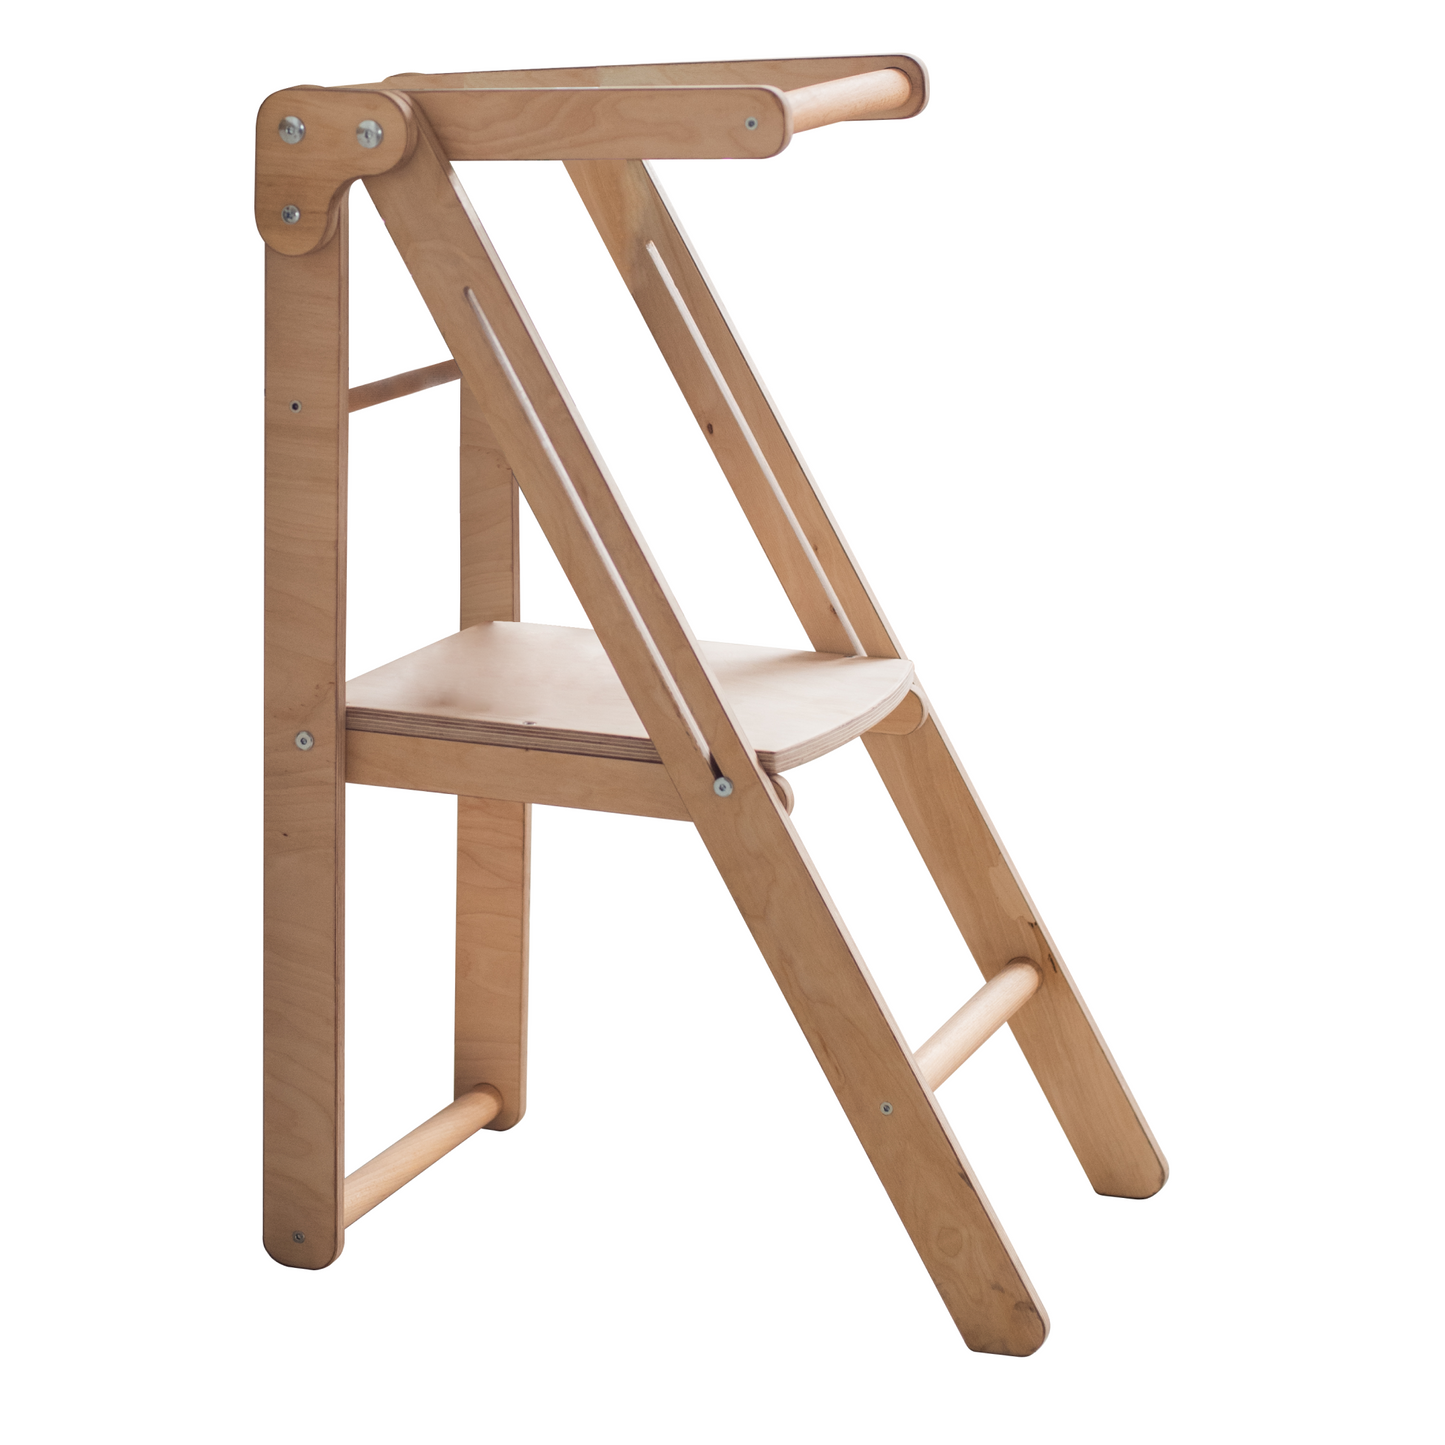 Foldable Step Stool for Toddlers - Kid Chair That Grows - Beige/Chocolate